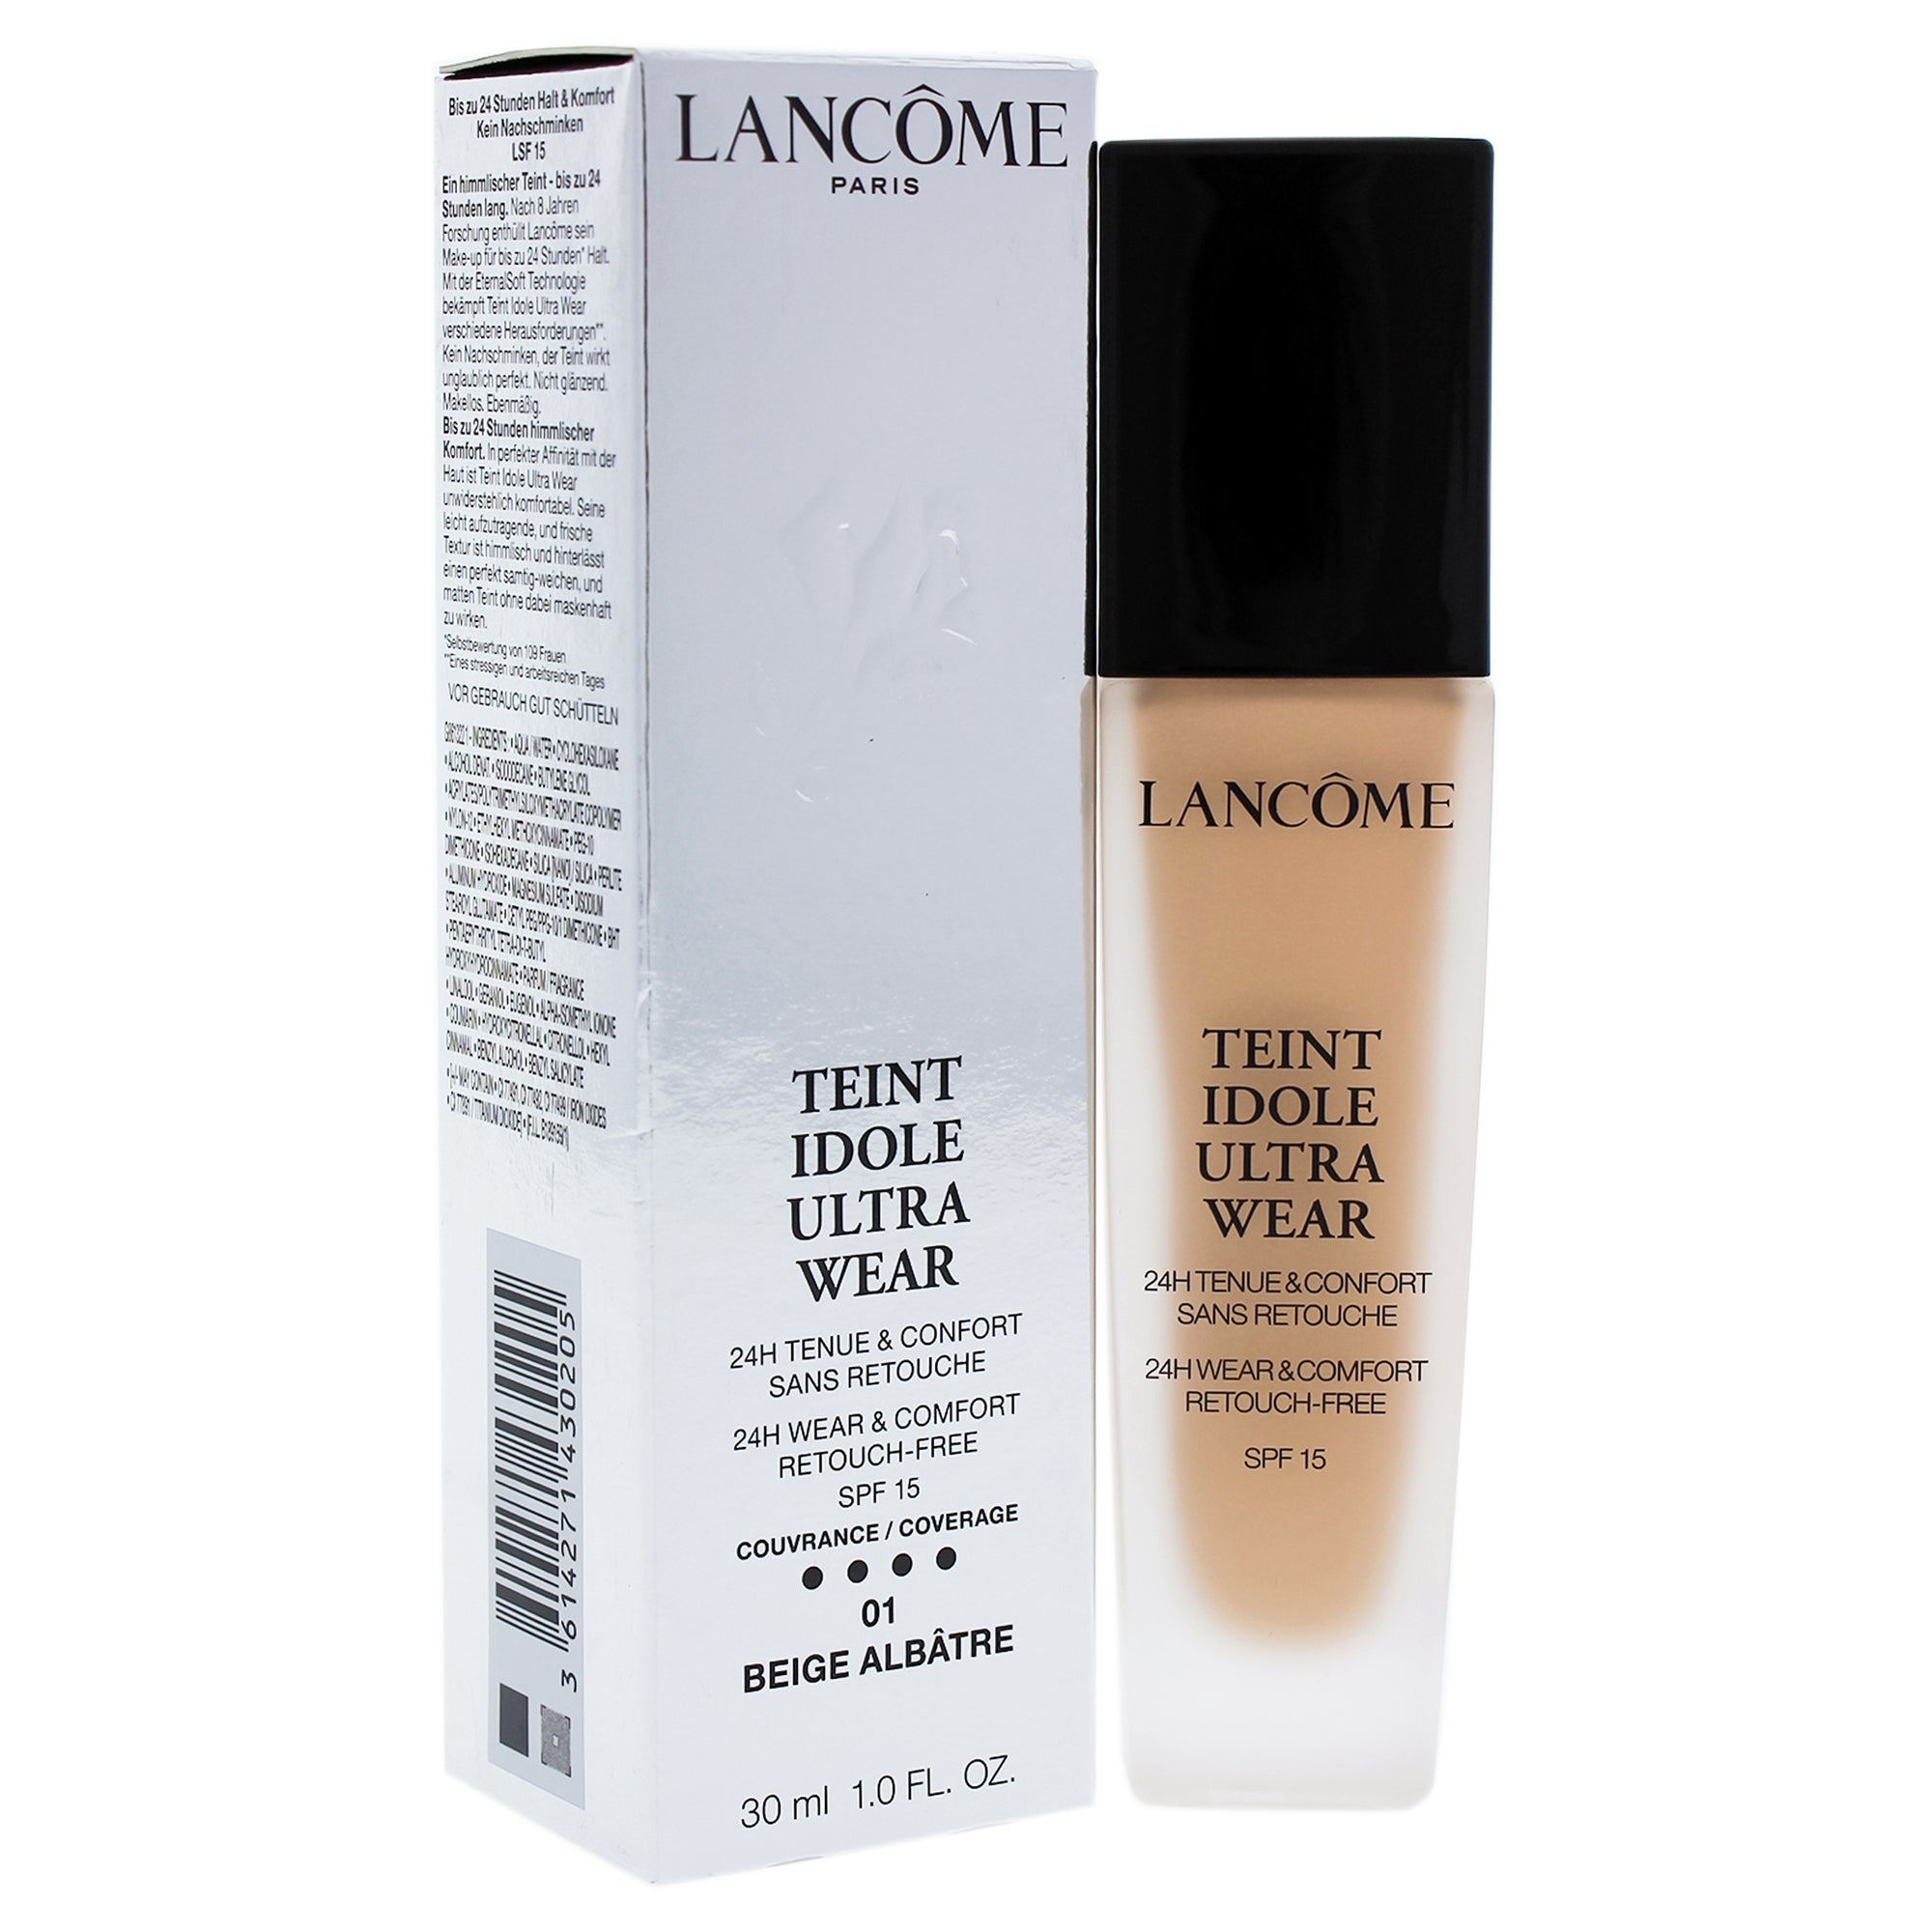 Teint Idole Ultra 24H Wear and Comfort Foundation SPF 15 - 01 Beige Albatre by Lancome for Women - 1 oz Foundation